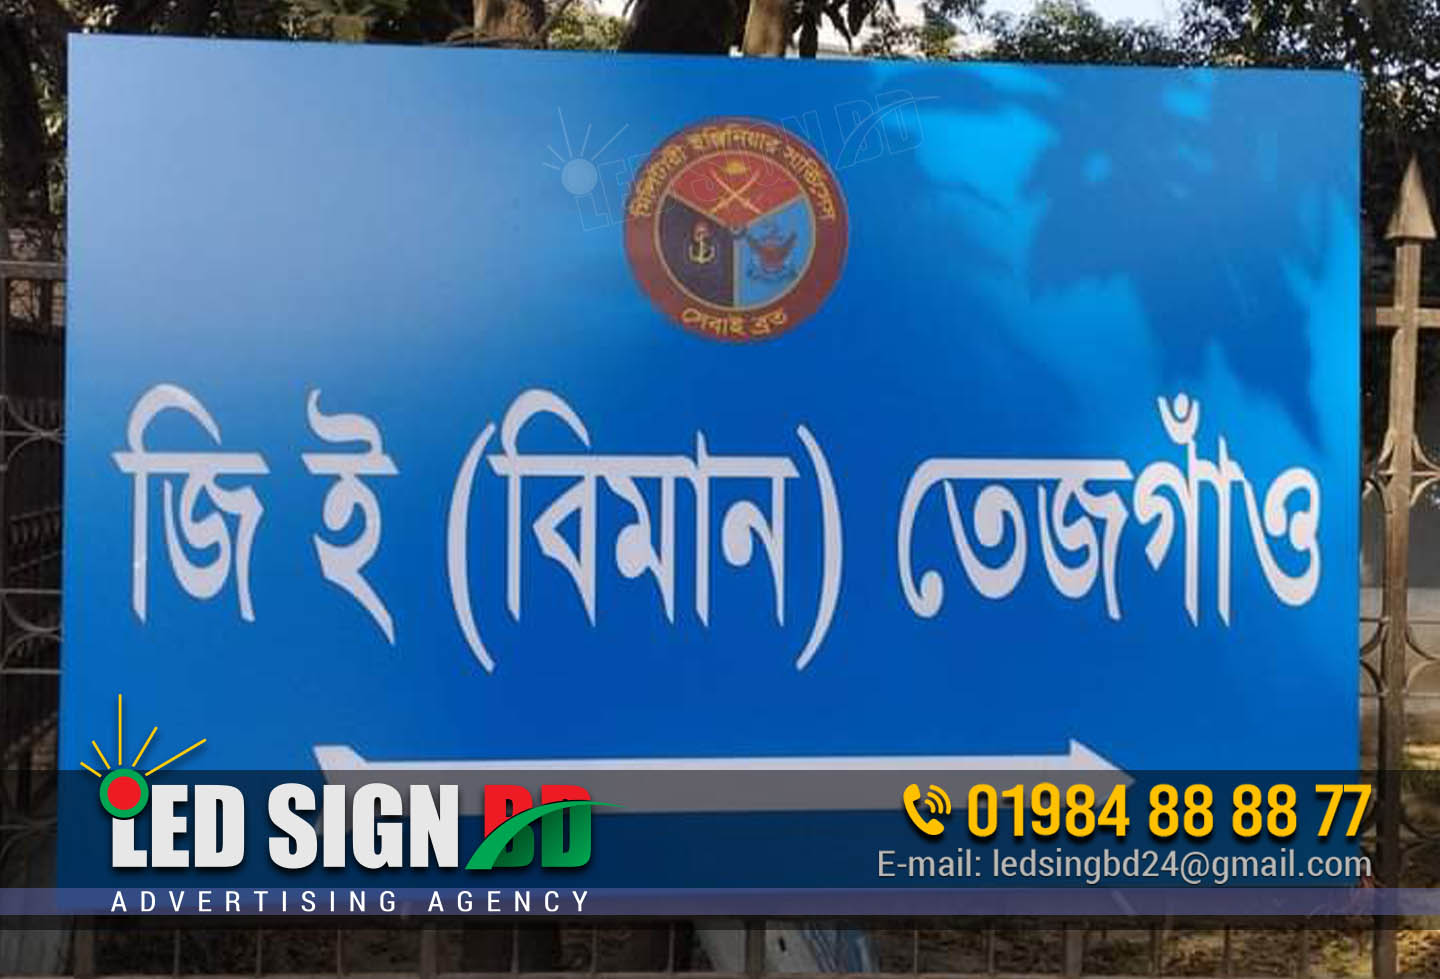 Acrylic 3D Letter Signs Making in Bangladesh 3D Letter Signboard Making Company If you need a sign for your business, look no further than 3D Letter Signboard Making Company. We have been in the business of making high-quality signs for over 20 years. We use the latest technology to create signs that are not only eye-catching but also durable. We have a wide range of materials to choose from, so you can be sure to find a sign that fits your needs. We also offer a variety of finishes, so you can get the exact look you want for your business. 1. Company name and tagline 2. Company history 3. What we do 4. Our team 5. Our clients 1. Company name and tagline 3D Letter Signboard Making Company is a leading provider of high-quality 3D letter signboards. We have been in business for over 10 years and have an excellent reputation for providing quality products and services. Our company name and tagline say it all: we are the best at what we do. We take pride in our work and guarantee that our products will meet or exceed your expectations. So if you're looking for a company that can provide you with the best 3D letter signboards, look no further than 3D Letter Signboard Making Company! 2. Company history Founded in 2006, 3D Letter Signboard Making Company is a leading manufacturer of 3D letter signboards. The company was started by two friends, John and James, who had a passion for 3D letter signboards. They started the company with a small loan from their parents and have since grown the company into a successful business. The company has come a long way since its humble beginnings. John and James have always been committed to providing the highest quality products and customer service. They have continued to invest in the latest technology and equipment to ensure that their products are of the highest quality. They have also expanded their product range to include a wide variety of 3D letter signboards. 3D Letter Signboard Making Company is now a well-established business with a strong reputation for quality and service. The company’s products are sold all over the world and they have a team of skilled and experienced employees. John and James are proud of what they have achieved and are passionate about continuing to grow the company. 3. What we do 3D Letter Signboard Making Company provides three-dimensional lettering solutions to business owners and organizations. We work with a wide range of materials, including metals, plastics, and wood, to create signs that are both functional and attractive. We also offer a variety of finishing options, such as painting, powder coating, and Polished Stainless Steel (PSS), to ensure that your sign will look its best. 3D Letter Signboard Making Company has over 25 years of experience in the sign industry. We are a family-owned and operated business, and we take pride in our work. We are committed to providing our customers with the highest quality signs at the most competitive prices. If you are looking for a sign company that can provide you with a unique and eye-catching sign, look no further than 3D Letter Signboard Making Company. We will work with you to create a sign that meets your needs and exceeds your expectations. 4. Our team At 3D Letter Signboard Making Company, we have a team of experienced professionals who are dedicated to providing the best possible service to our clients. We have a wide range of skills and expertise, and we are always willing to go the extra mile to make sure that our clients are satisfied. We are a family-owned business, and we take pride in our work. We have been in business for over 20 years, and we have a reputation for being the best in the business. We are always looking for new ways to improve our services, and we are always willing to listen to our clients’ needs. We are committed to providing the highest quality products and services to our clients, and we will continue to work hard to meet and exceed their expectations. 5. Our clients We've had the privilege of working with some amazing clients over the years, and we're grateful for each and every one of them. Here are just a few of the clients we've had the pleasure of working with: Client 1: A national retail chain that was looking for a way to stand out from the competition and get noticed by potential customers. We created a 3D letter signboard for them that was installed at their flagship store. The sign was so successful that they ended up ordering more for additional stores. Client 2: A local business that was in need of a new sign for their storefront. We worked with them to create a custom 3D letter sign that fit their budget and their branding. They were so happy with the result that they've since ordered additional signs from us for their other locations. Client 3: A school that was looking for a way to show their school spirit. We designed and installed a 3D letter signboard for them that featured their school colors and mascot. The sign has been a hit with students, staff, and parents alike. Client 4: A church that was looking for a way to beautify their entrance. We created a 3D letter signboard for them that featured their church name and logo. They were so pleased with the result that they've since ordered additional signs from us for their other properties. Client 5: A large corporation that was looking for a way to promote their brand. We designed and installed a 3D letter signboard for them that was placed in their lobby. The sign was so successful that they've since ordered more for their other offices. 3D Letter Signboard Making Company is a great company that produces high quality signs for businesses. They have a wide range of products to choose from and their prices are very reasonable. I would highly recommend this company to anyone in need of a sign for their business. 3d acrylic letters. 3d acrylic letters for wall. 3d acrylic letter sign board price. How to make 3d acrylic letters. Acrylic letters signage. 3d acrylic letter signs. How to make 3d acrylic signs. How to make 3d acrylic letter. Hcrylic 3d letters price. How do you make acrylic signs. How to make a backlit acrylic sign. Acrylic sign board price in bangladesh. Acrylic backlit sign board. Acrylic backlit letter. Acrylic backlit board. Acrylic backlit signage detail. Sign board making online. How to make sign board design. 3d acrylic letter sign board price. 3d sign board making. Sign board making near me. Sow to make led sign board circuit. How to make sign board in minecraft. 3d sign board maker near me. Ishatech advertising ltd. Sign board advertising. Advertising sign board design. Billboard advertising cost in bangladesh. Billboard advertising bd. Sign board price in bangladesh. Sign board design in bangladesh. Digital billboard price in bangladesh. Signboard bd. Sign board advertising company. Advertising signboards. Signboard marketing. Signboard advertising company. Name plate design online free. Name plate designs for main gate. Name plate designs images. Name plate design for home. How to make name plate at home. Name plate design ideas. Advertising agency in dhaka. Billboard advertising bd. List of advertising agency in bangladesh. Top advertising company in bangladesh. Top 10 advertising agency in bangladesh. Billboard advertising cost in bangladesh. Newspaper advertising agency in dhaka bangladesh. Specialized advertising agency in bangladesh.